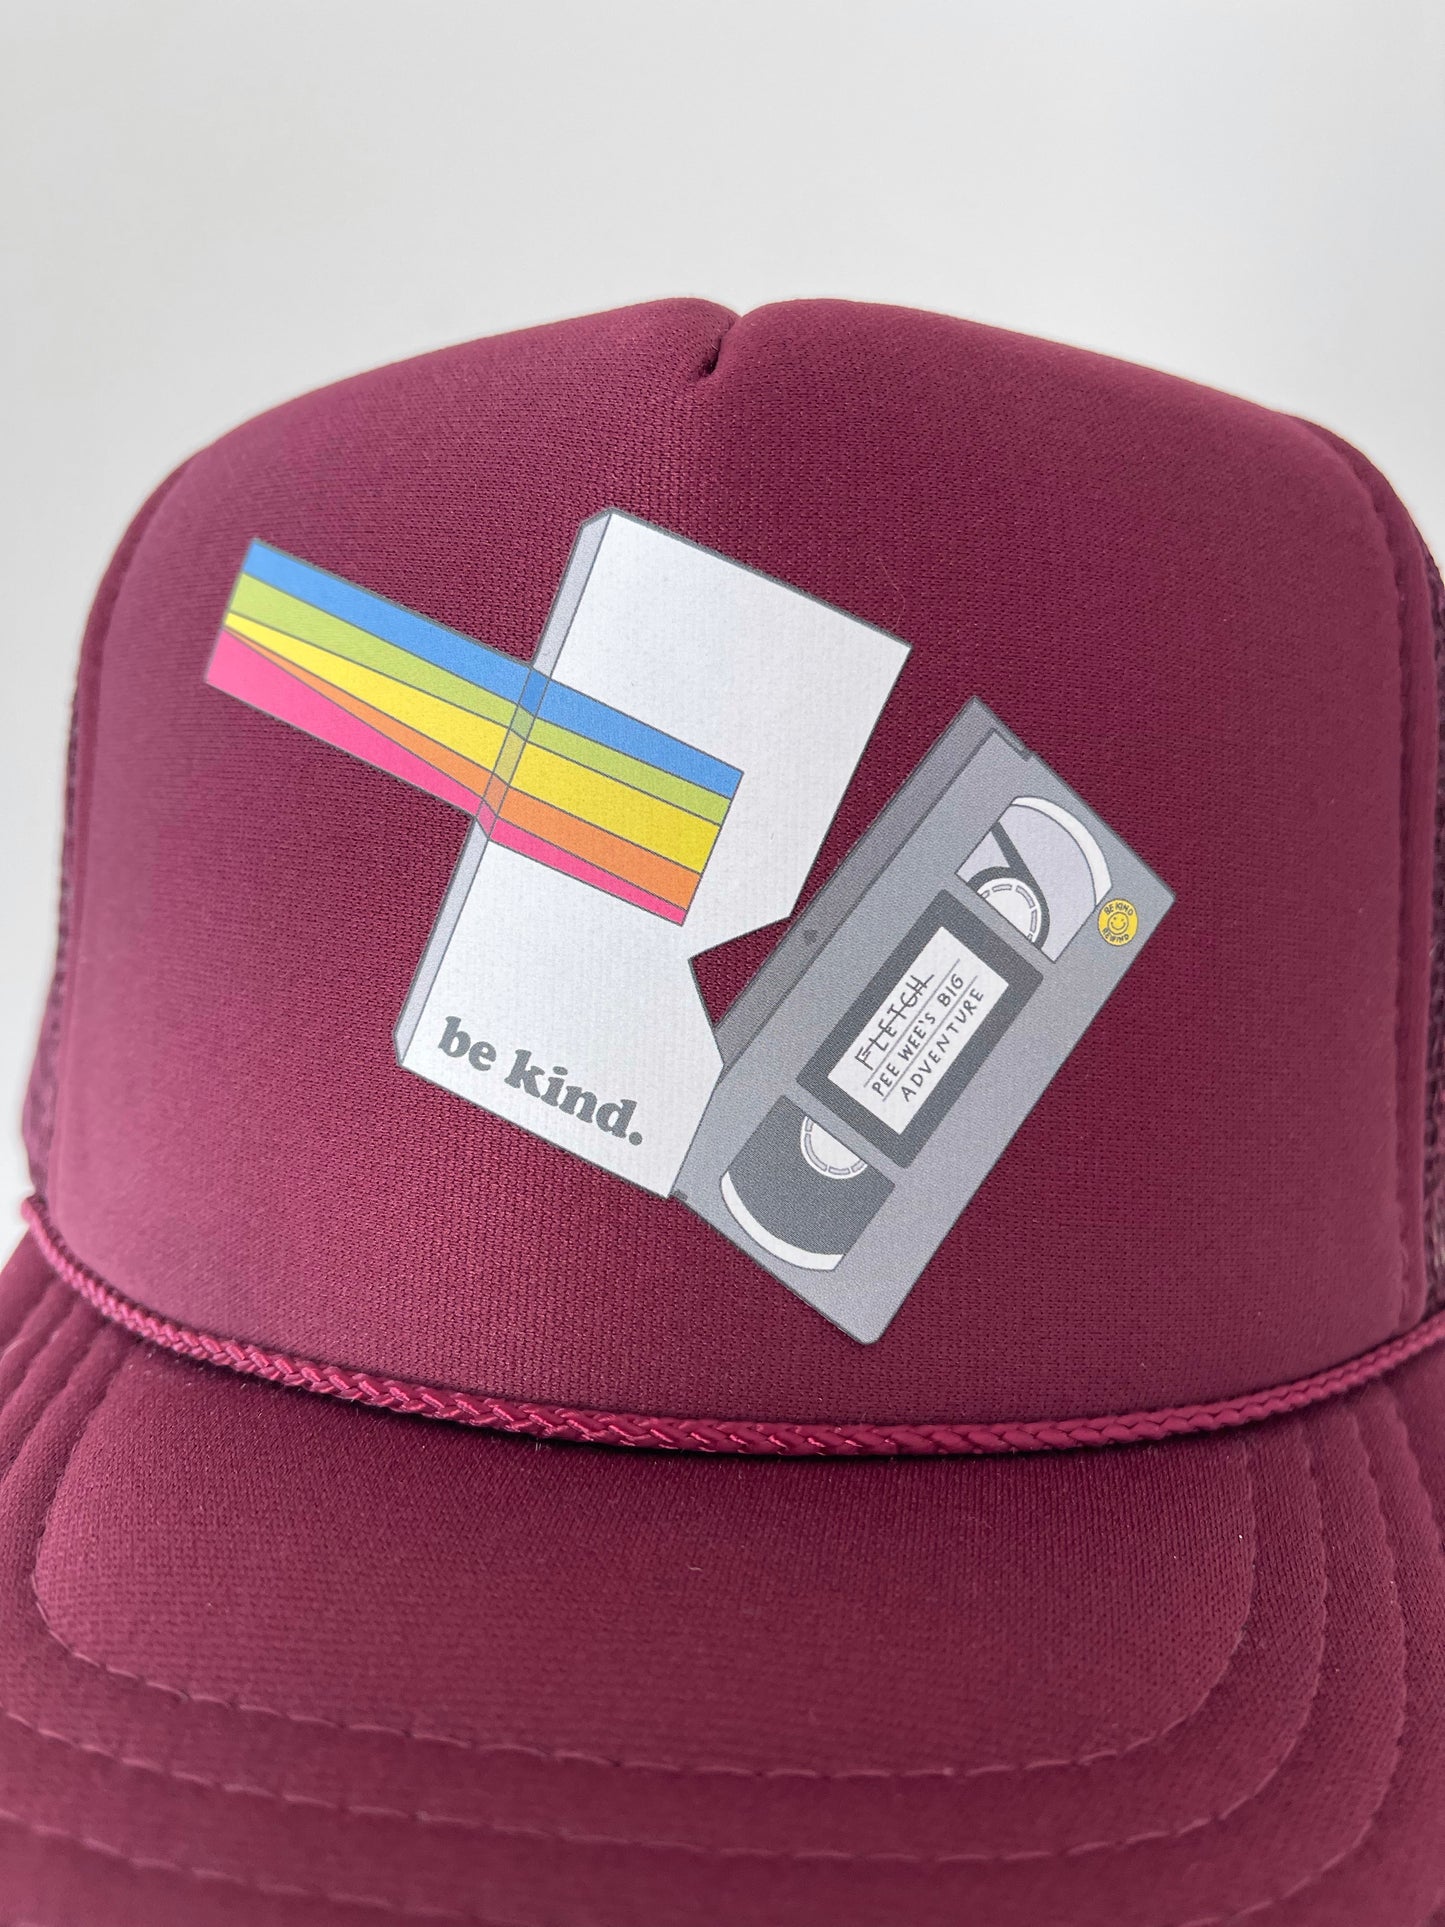 Be Kind. (Rewind VHS 📼 Hat)